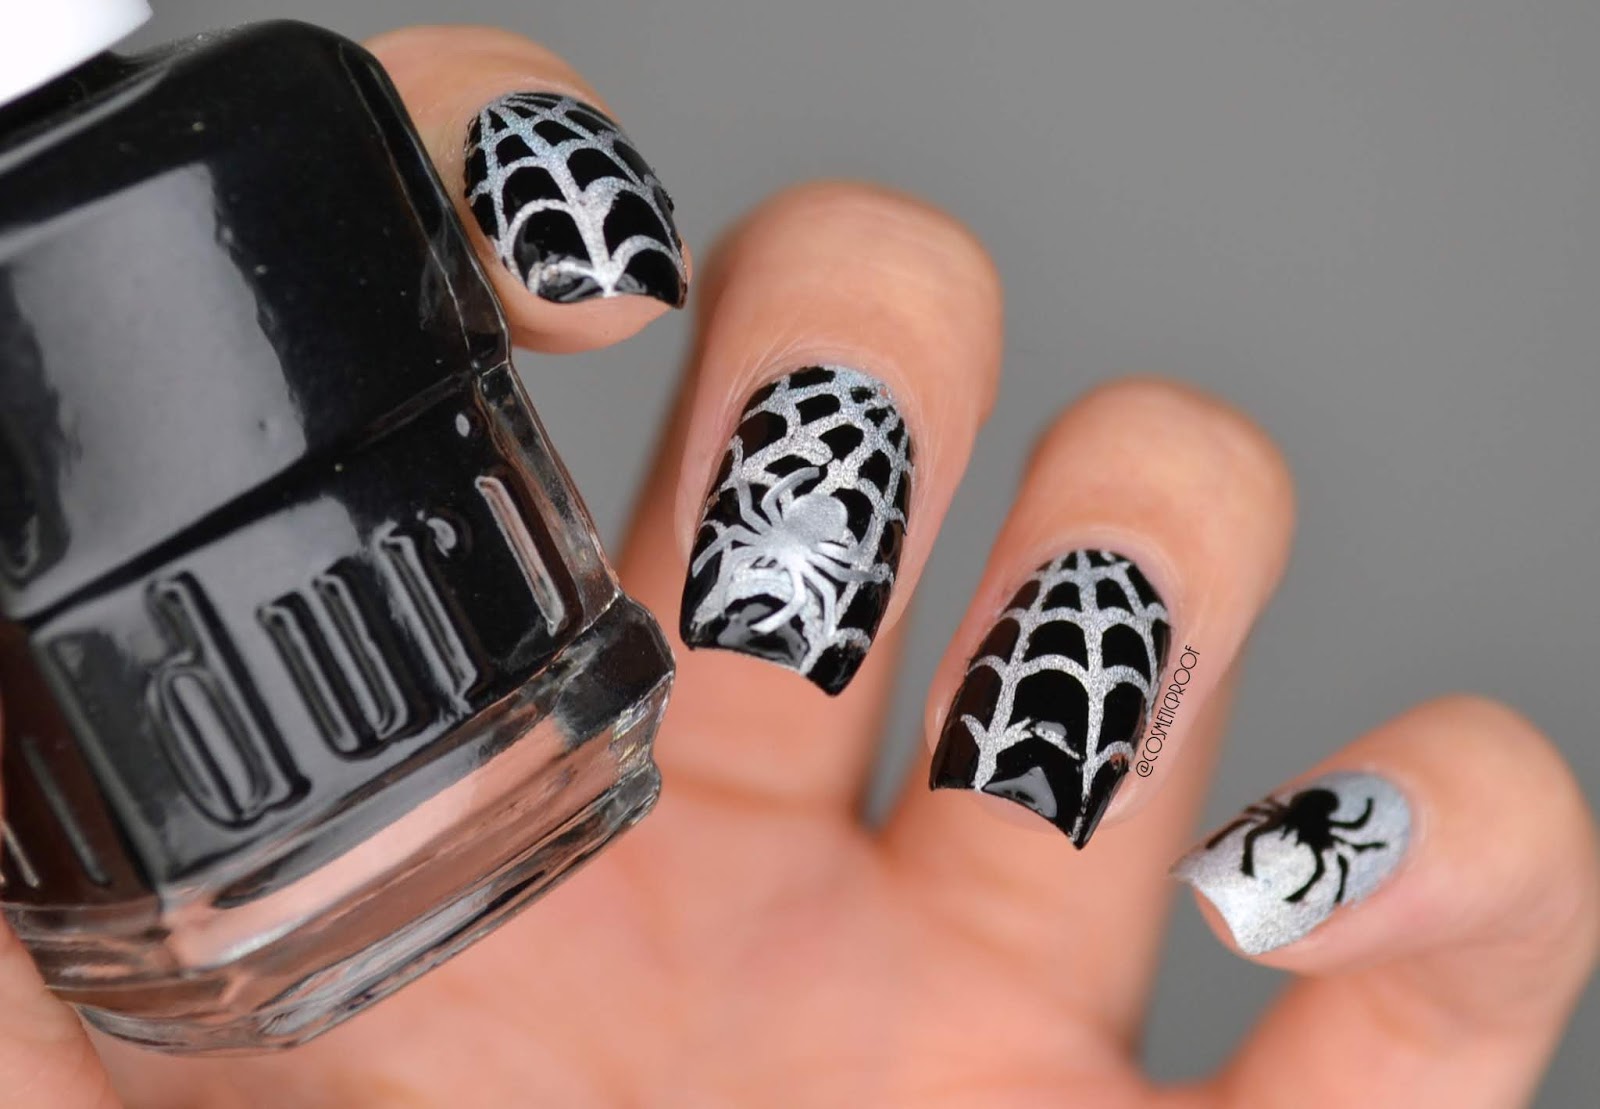 1. Spooky Spider Web Nails - wide 8